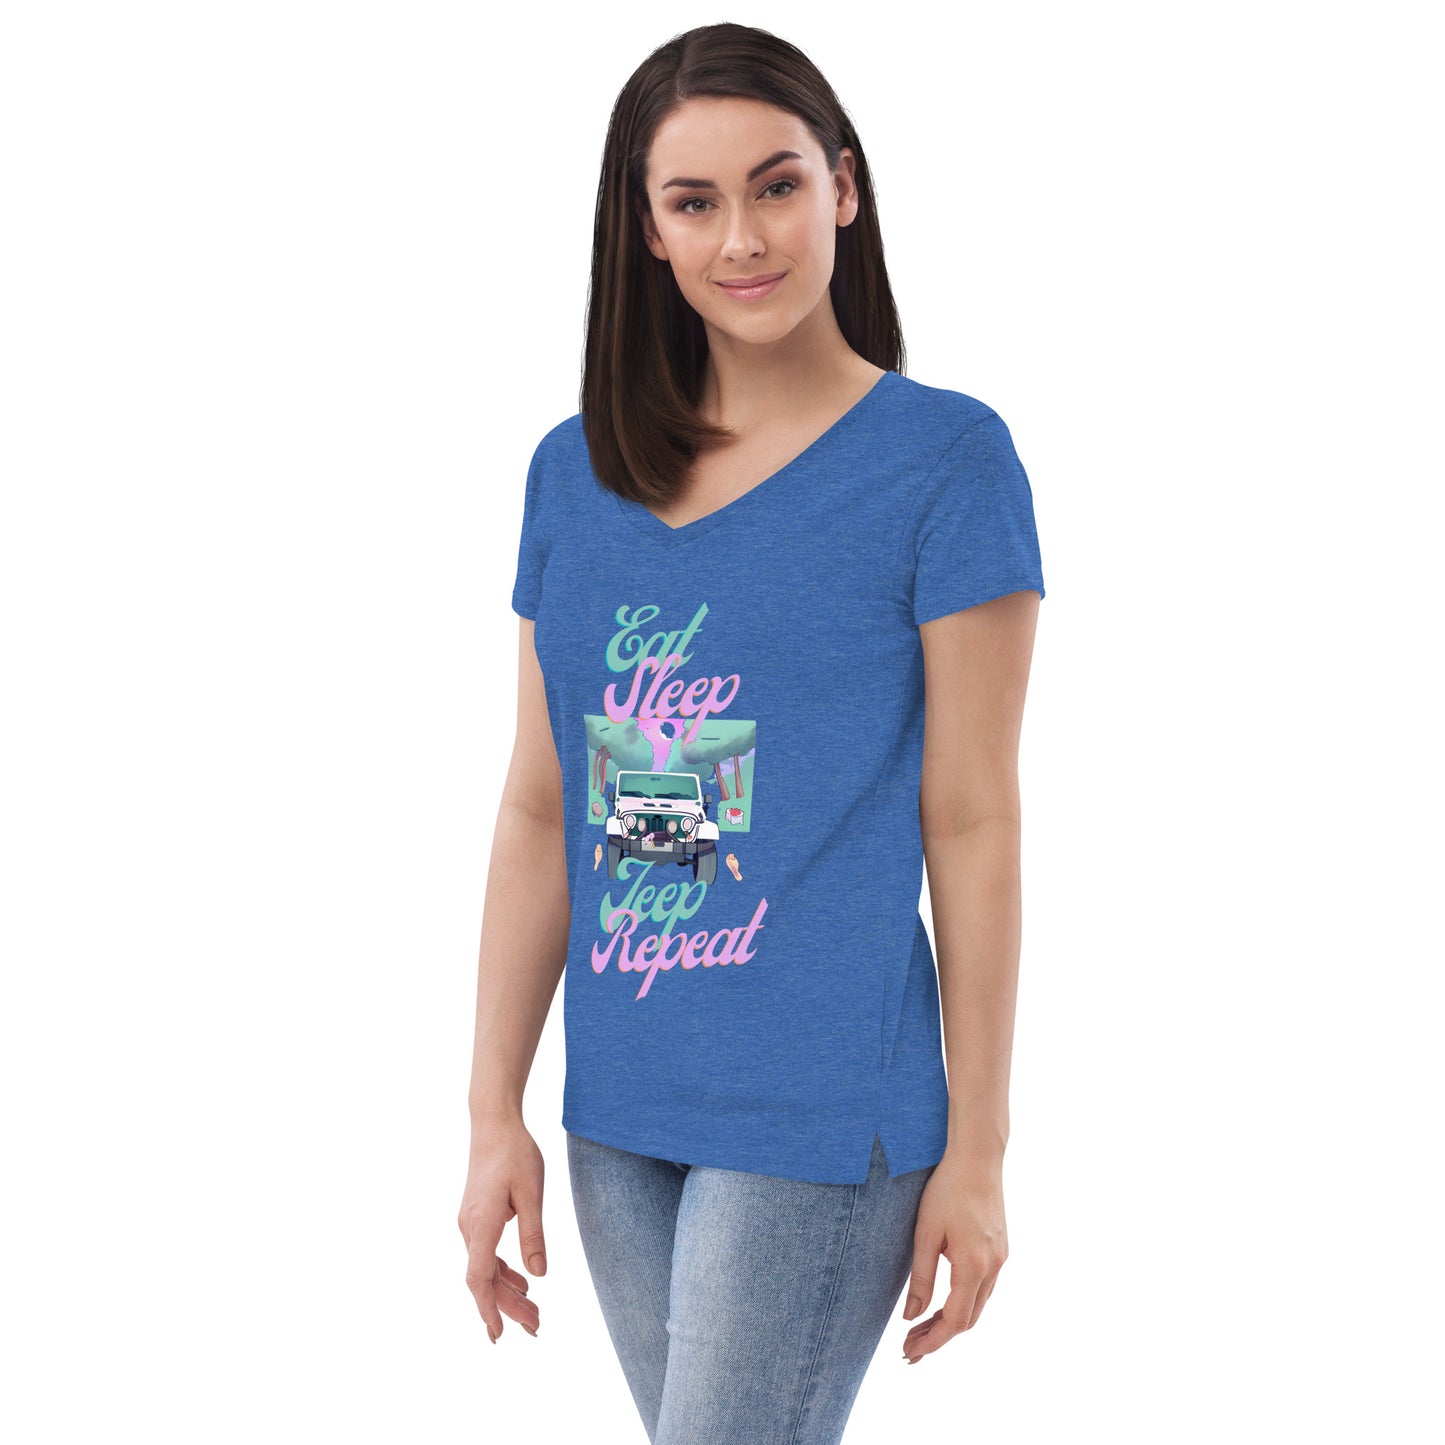 Eat. Sleep. Jeep. Repeat - Women’s recycled v-neck t-shirt